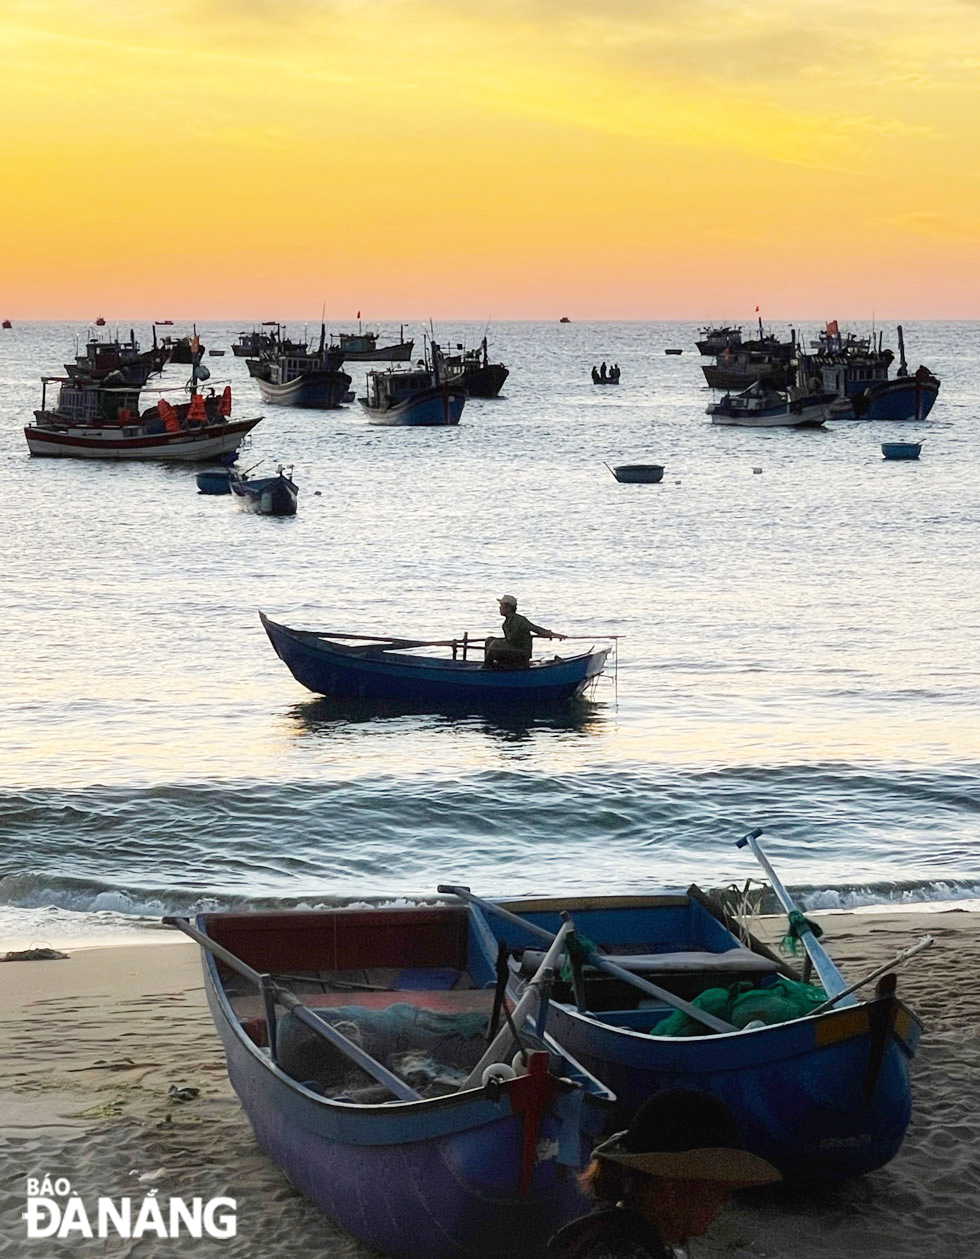 The An Hai fishing village is considered the most beautiful fishing village in Phu Yen Province thanks to its unspoiled and rustic beauty.